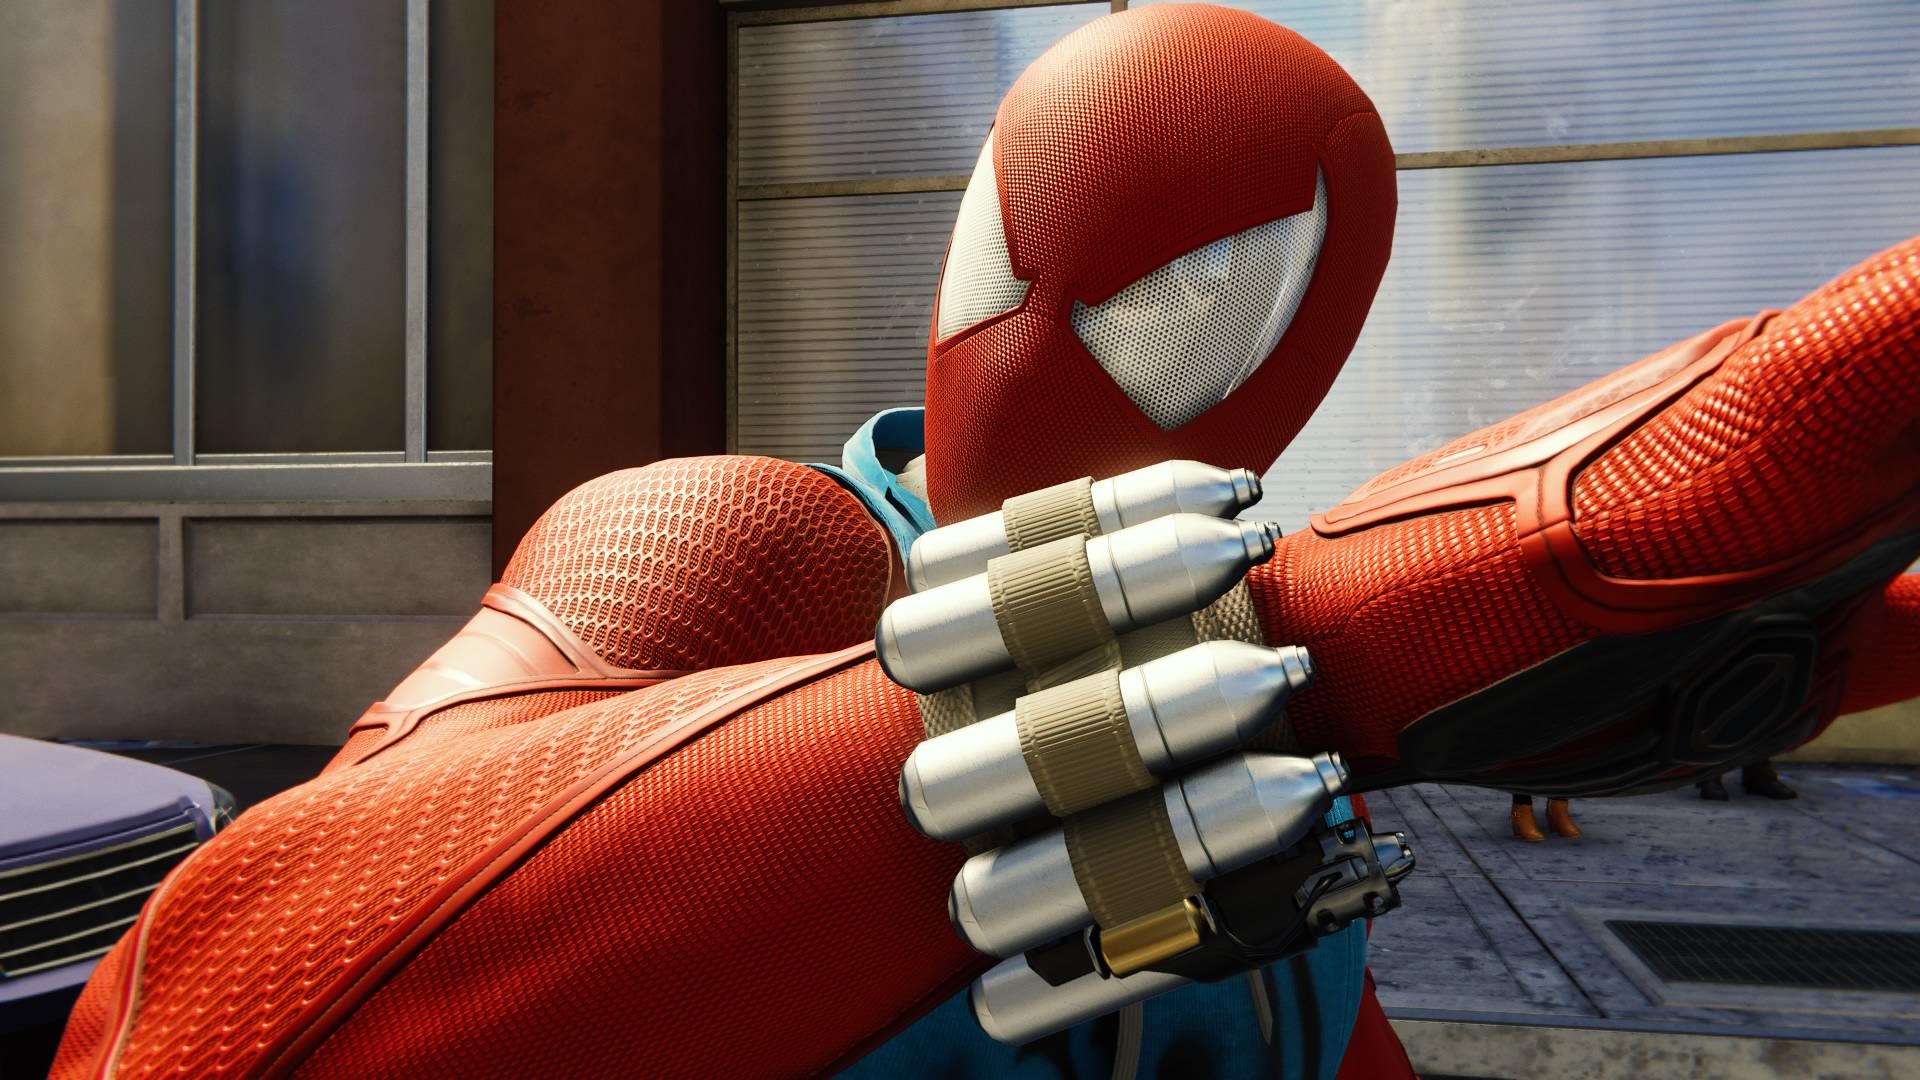 Love the detail on Ben's Web Shooters